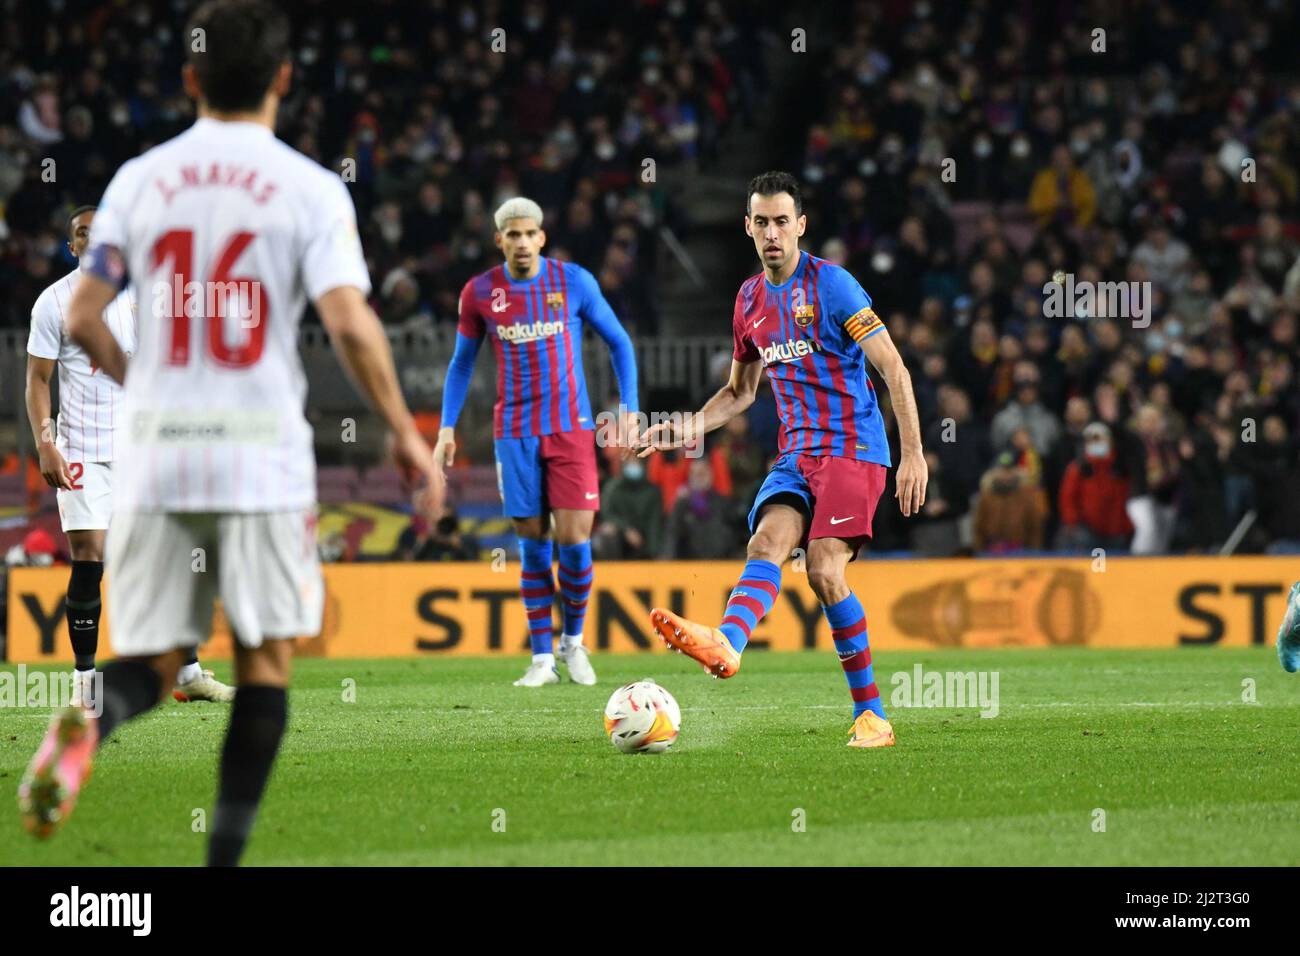 BARCELONA, SPAIN - APRIL 3: Sergio Busquets of FC Barcelona passes the ball during La Liga match between FC Barcelona and Sevilla FC at Campo Nou on April 3, 2022 in Barcelona, Spain. (Photo by Sara Aribó/Pximages) Credit: Px Images/Alamy Live News Stock Photo